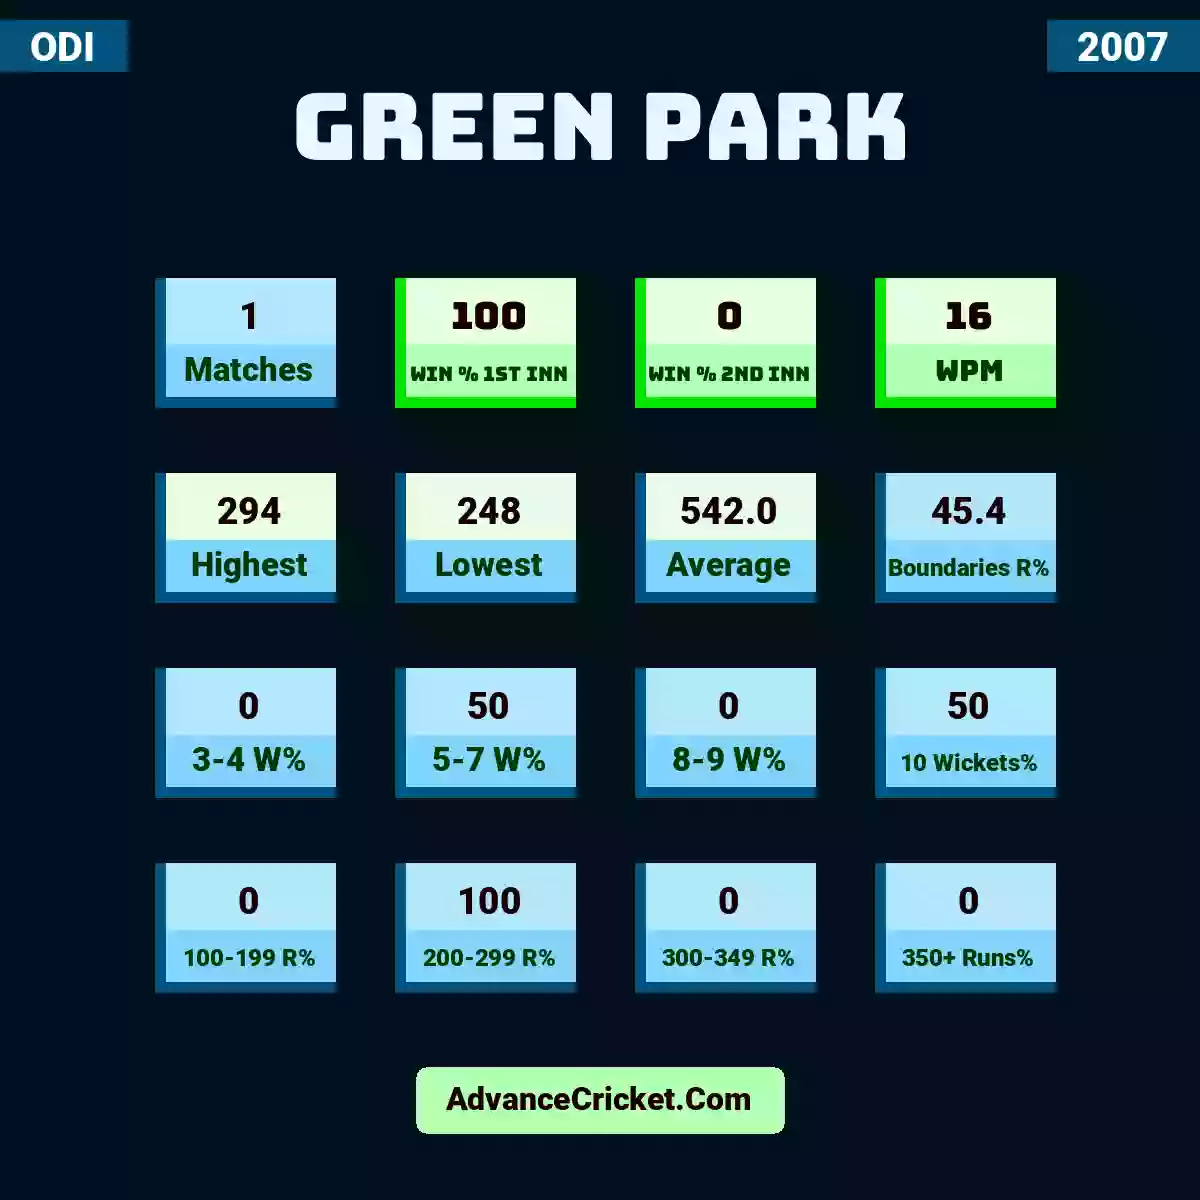 Image showing Green Park with Matches: 1, Win % 1st Inn: 100, Win % 2nd Inn: 0, WPM: 16, Highest: 294, Lowest: 248, Average: 542.0, Boundaries R%: 45.4, 3-4 W%: 0, 5-7 W%: 50, 8-9 W%: 0, 10 Wickets%: 50, 100-199 R%: 0, 200-299 R%: 100, 300-349 R%: 0, 350+ Runs%: 0.